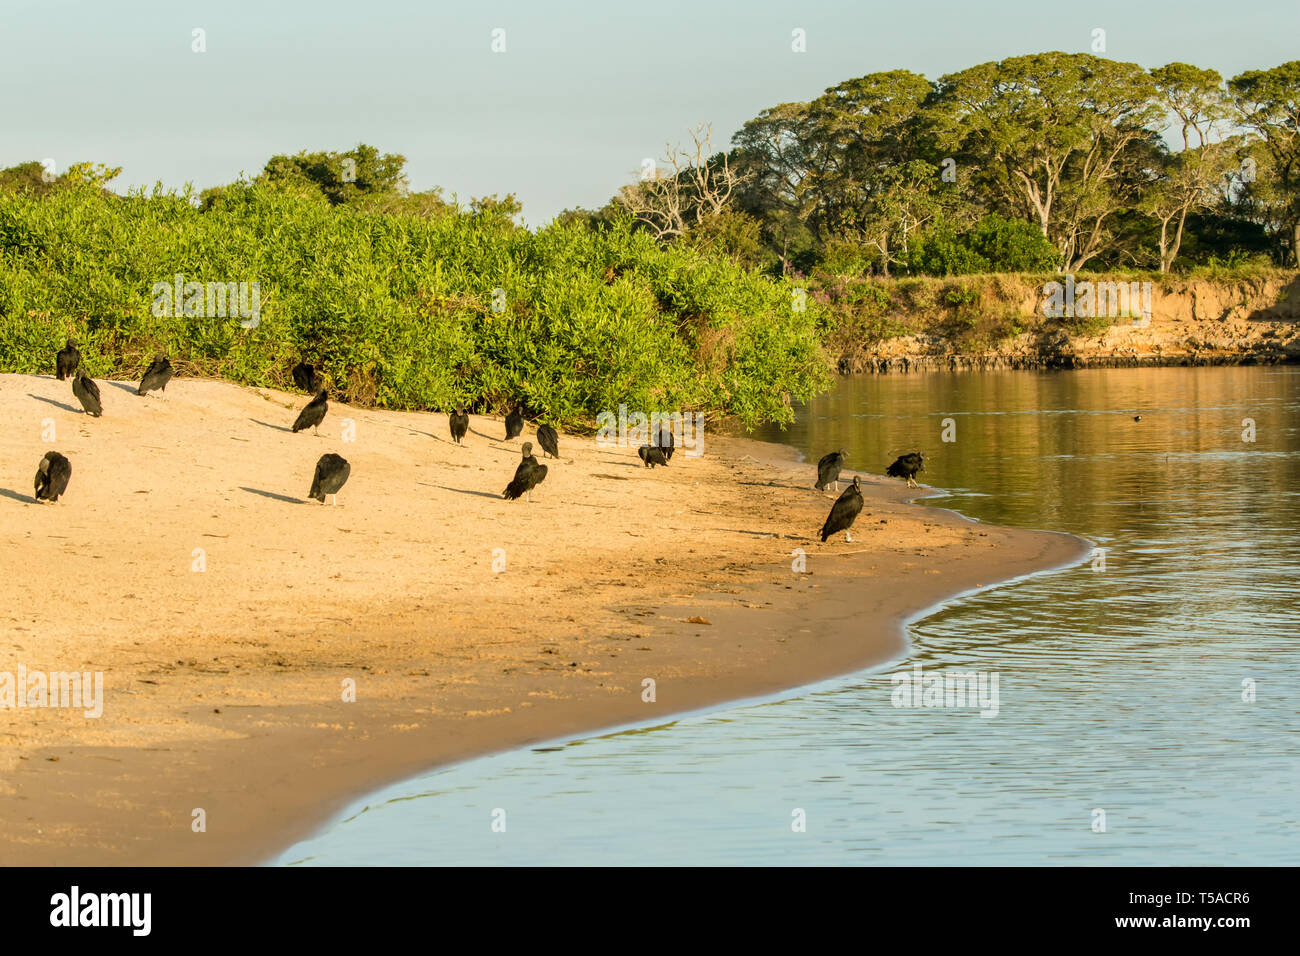 Pantanal region, Mato Grosso, Brazil, South America.  A flock of Black Vultures on the sandy riverbank of the Cuiaba River. Stock Photo